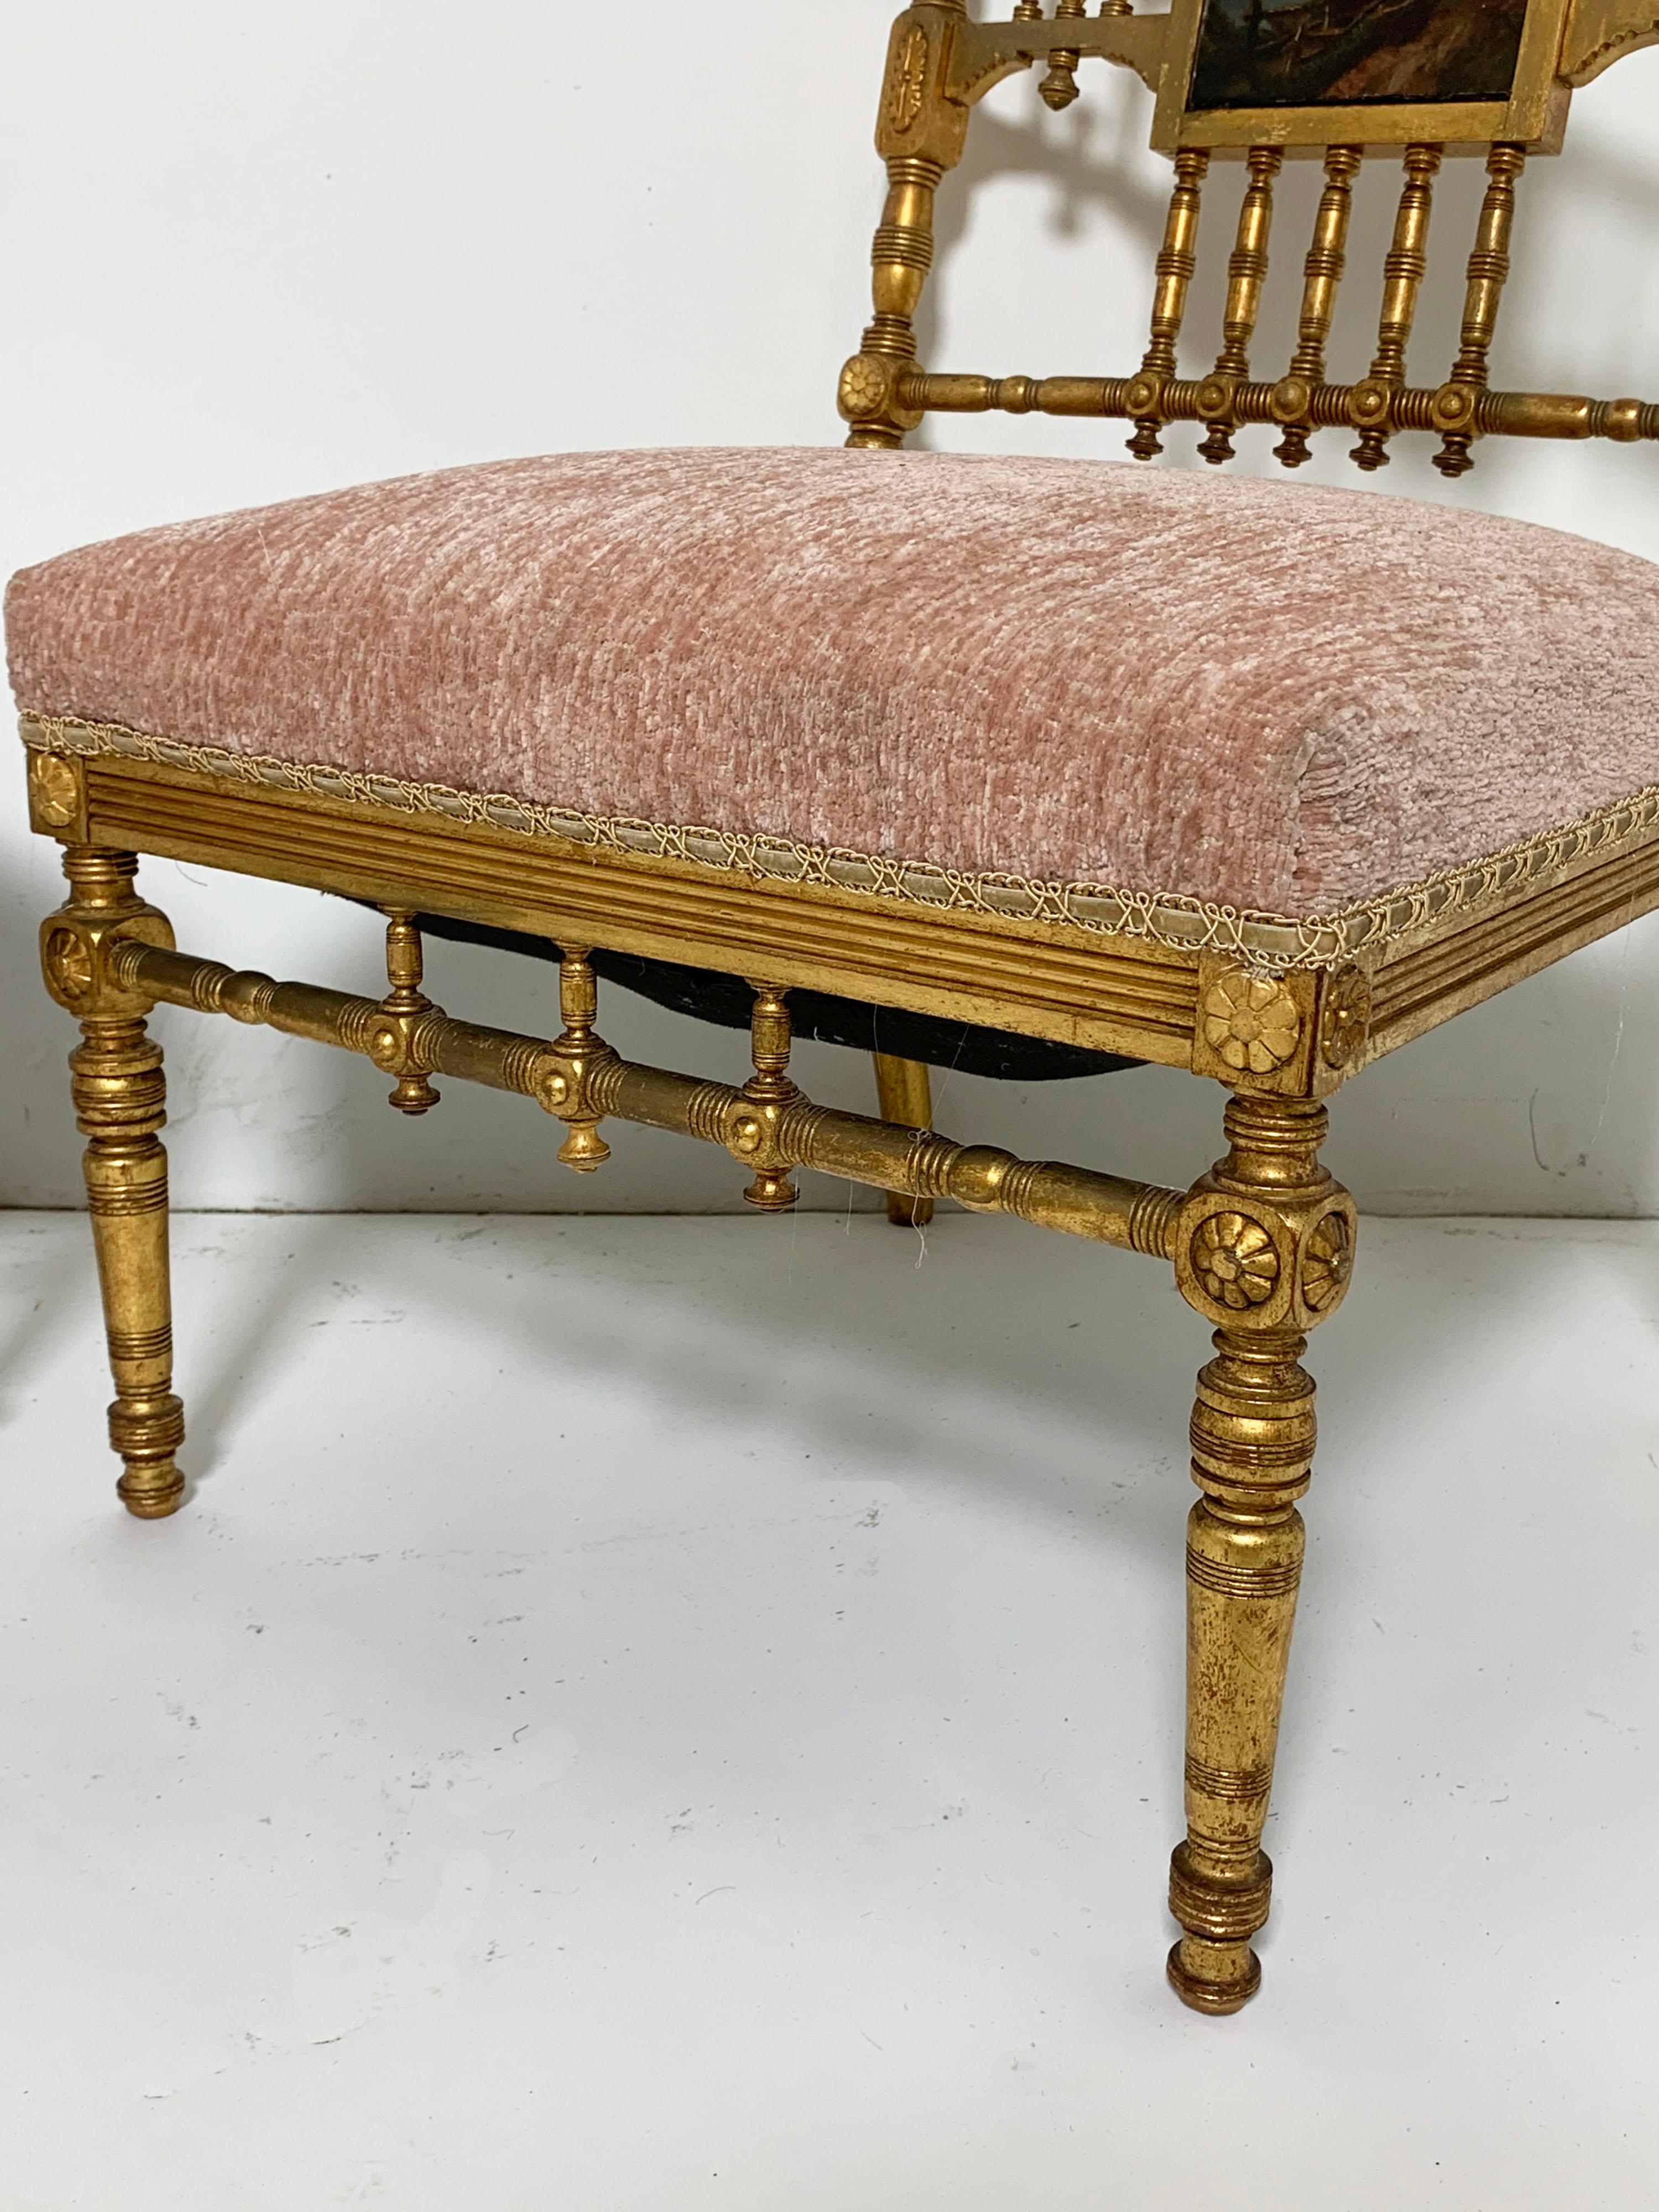 Late 19th Century Two American Aesthetic Movement Giltwood Slipper Chairs, circa Late 1800s